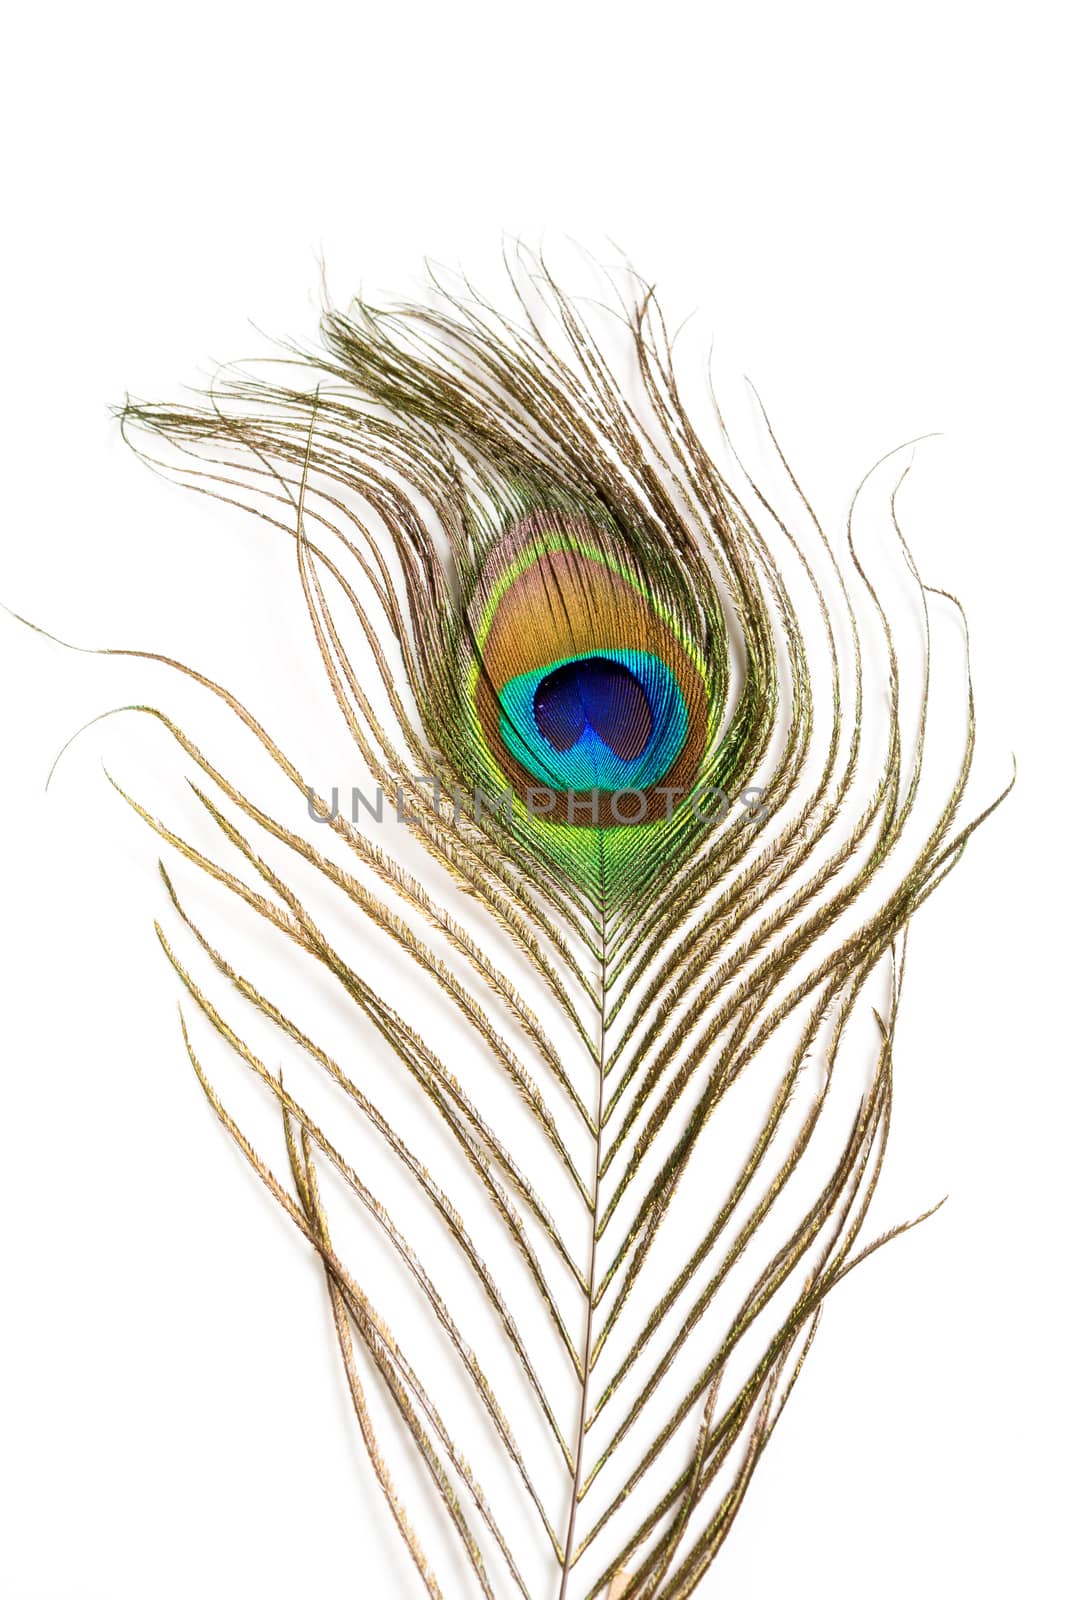 Peacock feather isolated on a white background by galinasharapova